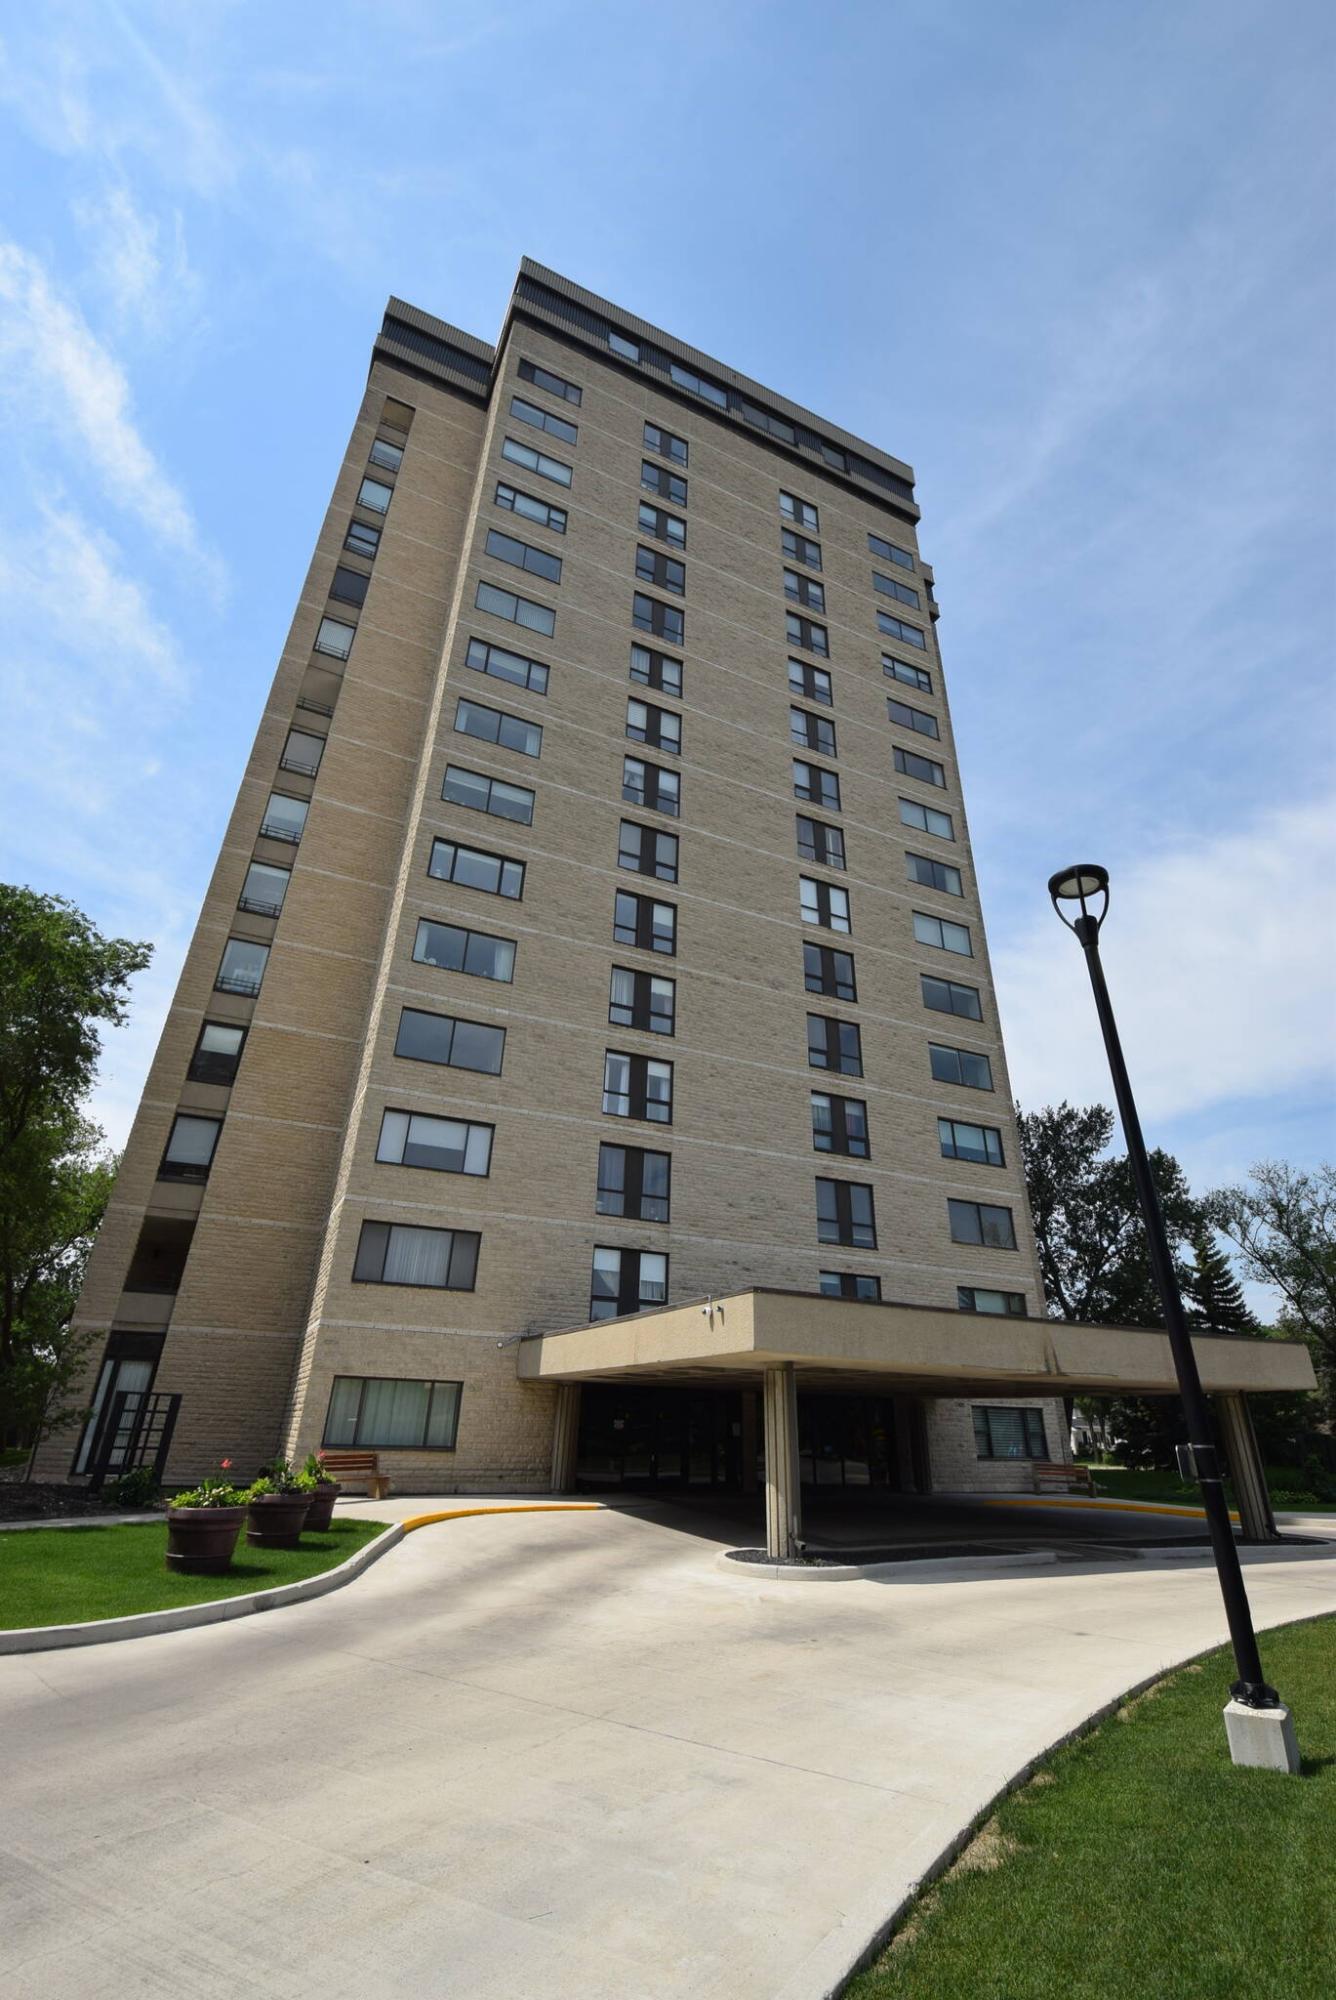  <p>Photos by Todd Lewys / Winnipeg Free Press</p>
                                <p>The large fourth floor suite has been tastefully renovated throughout and is in true move-in-ready shape.</p> 